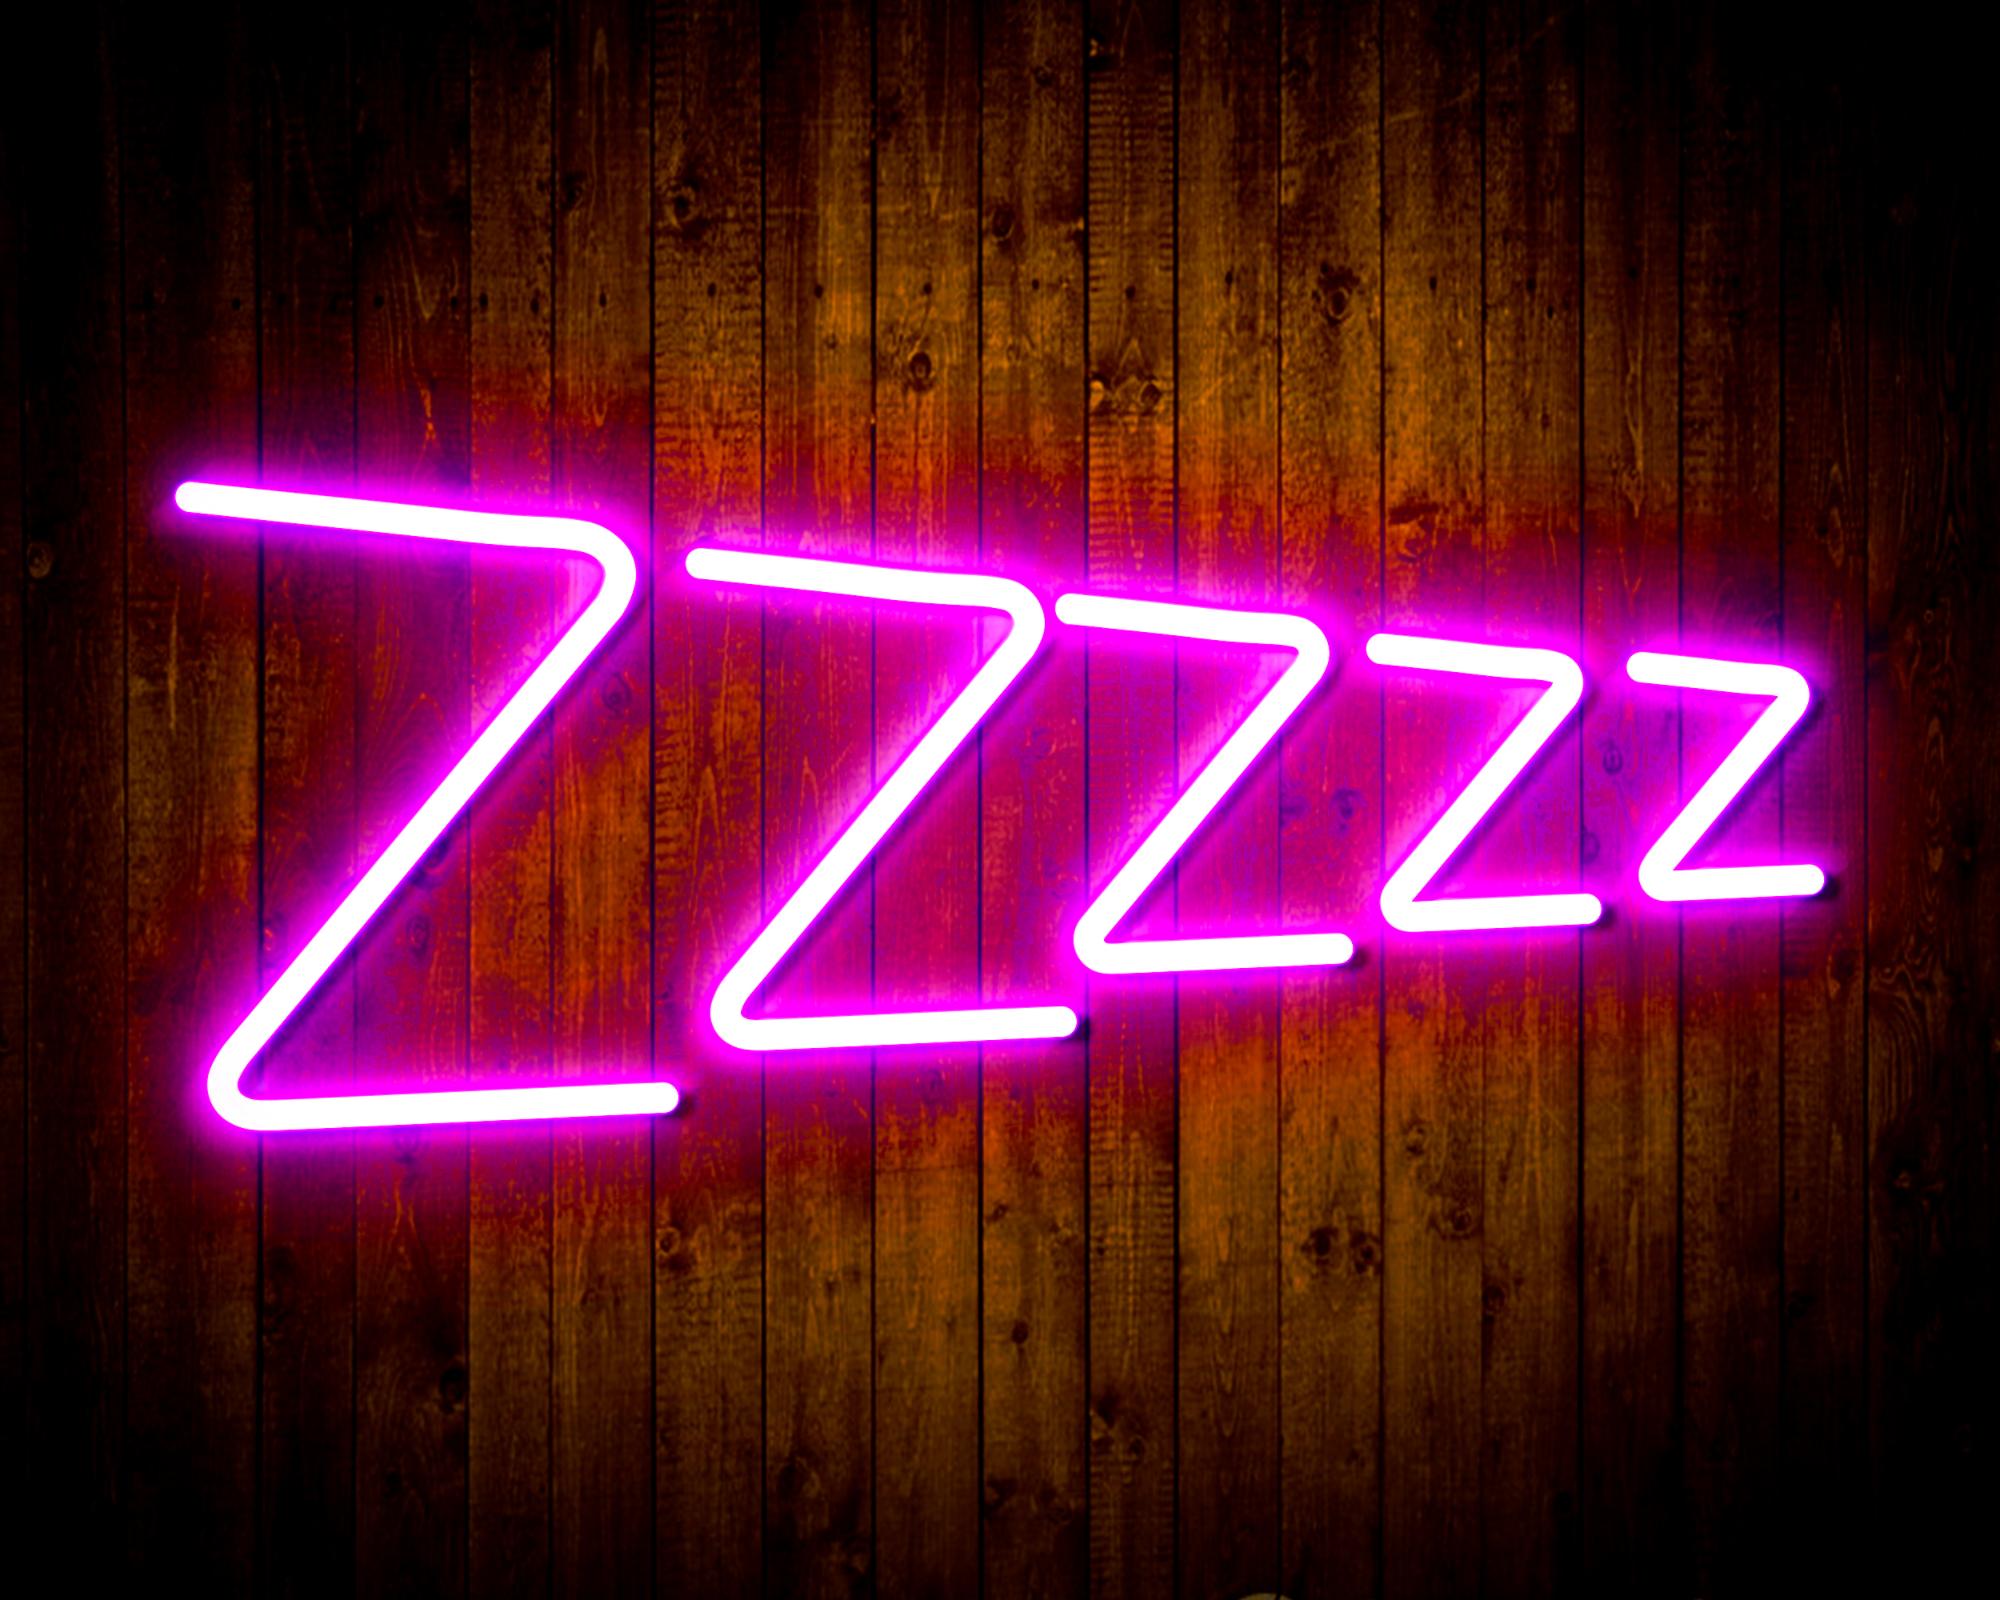 Zzzzz LED Neon Sign Wall Light